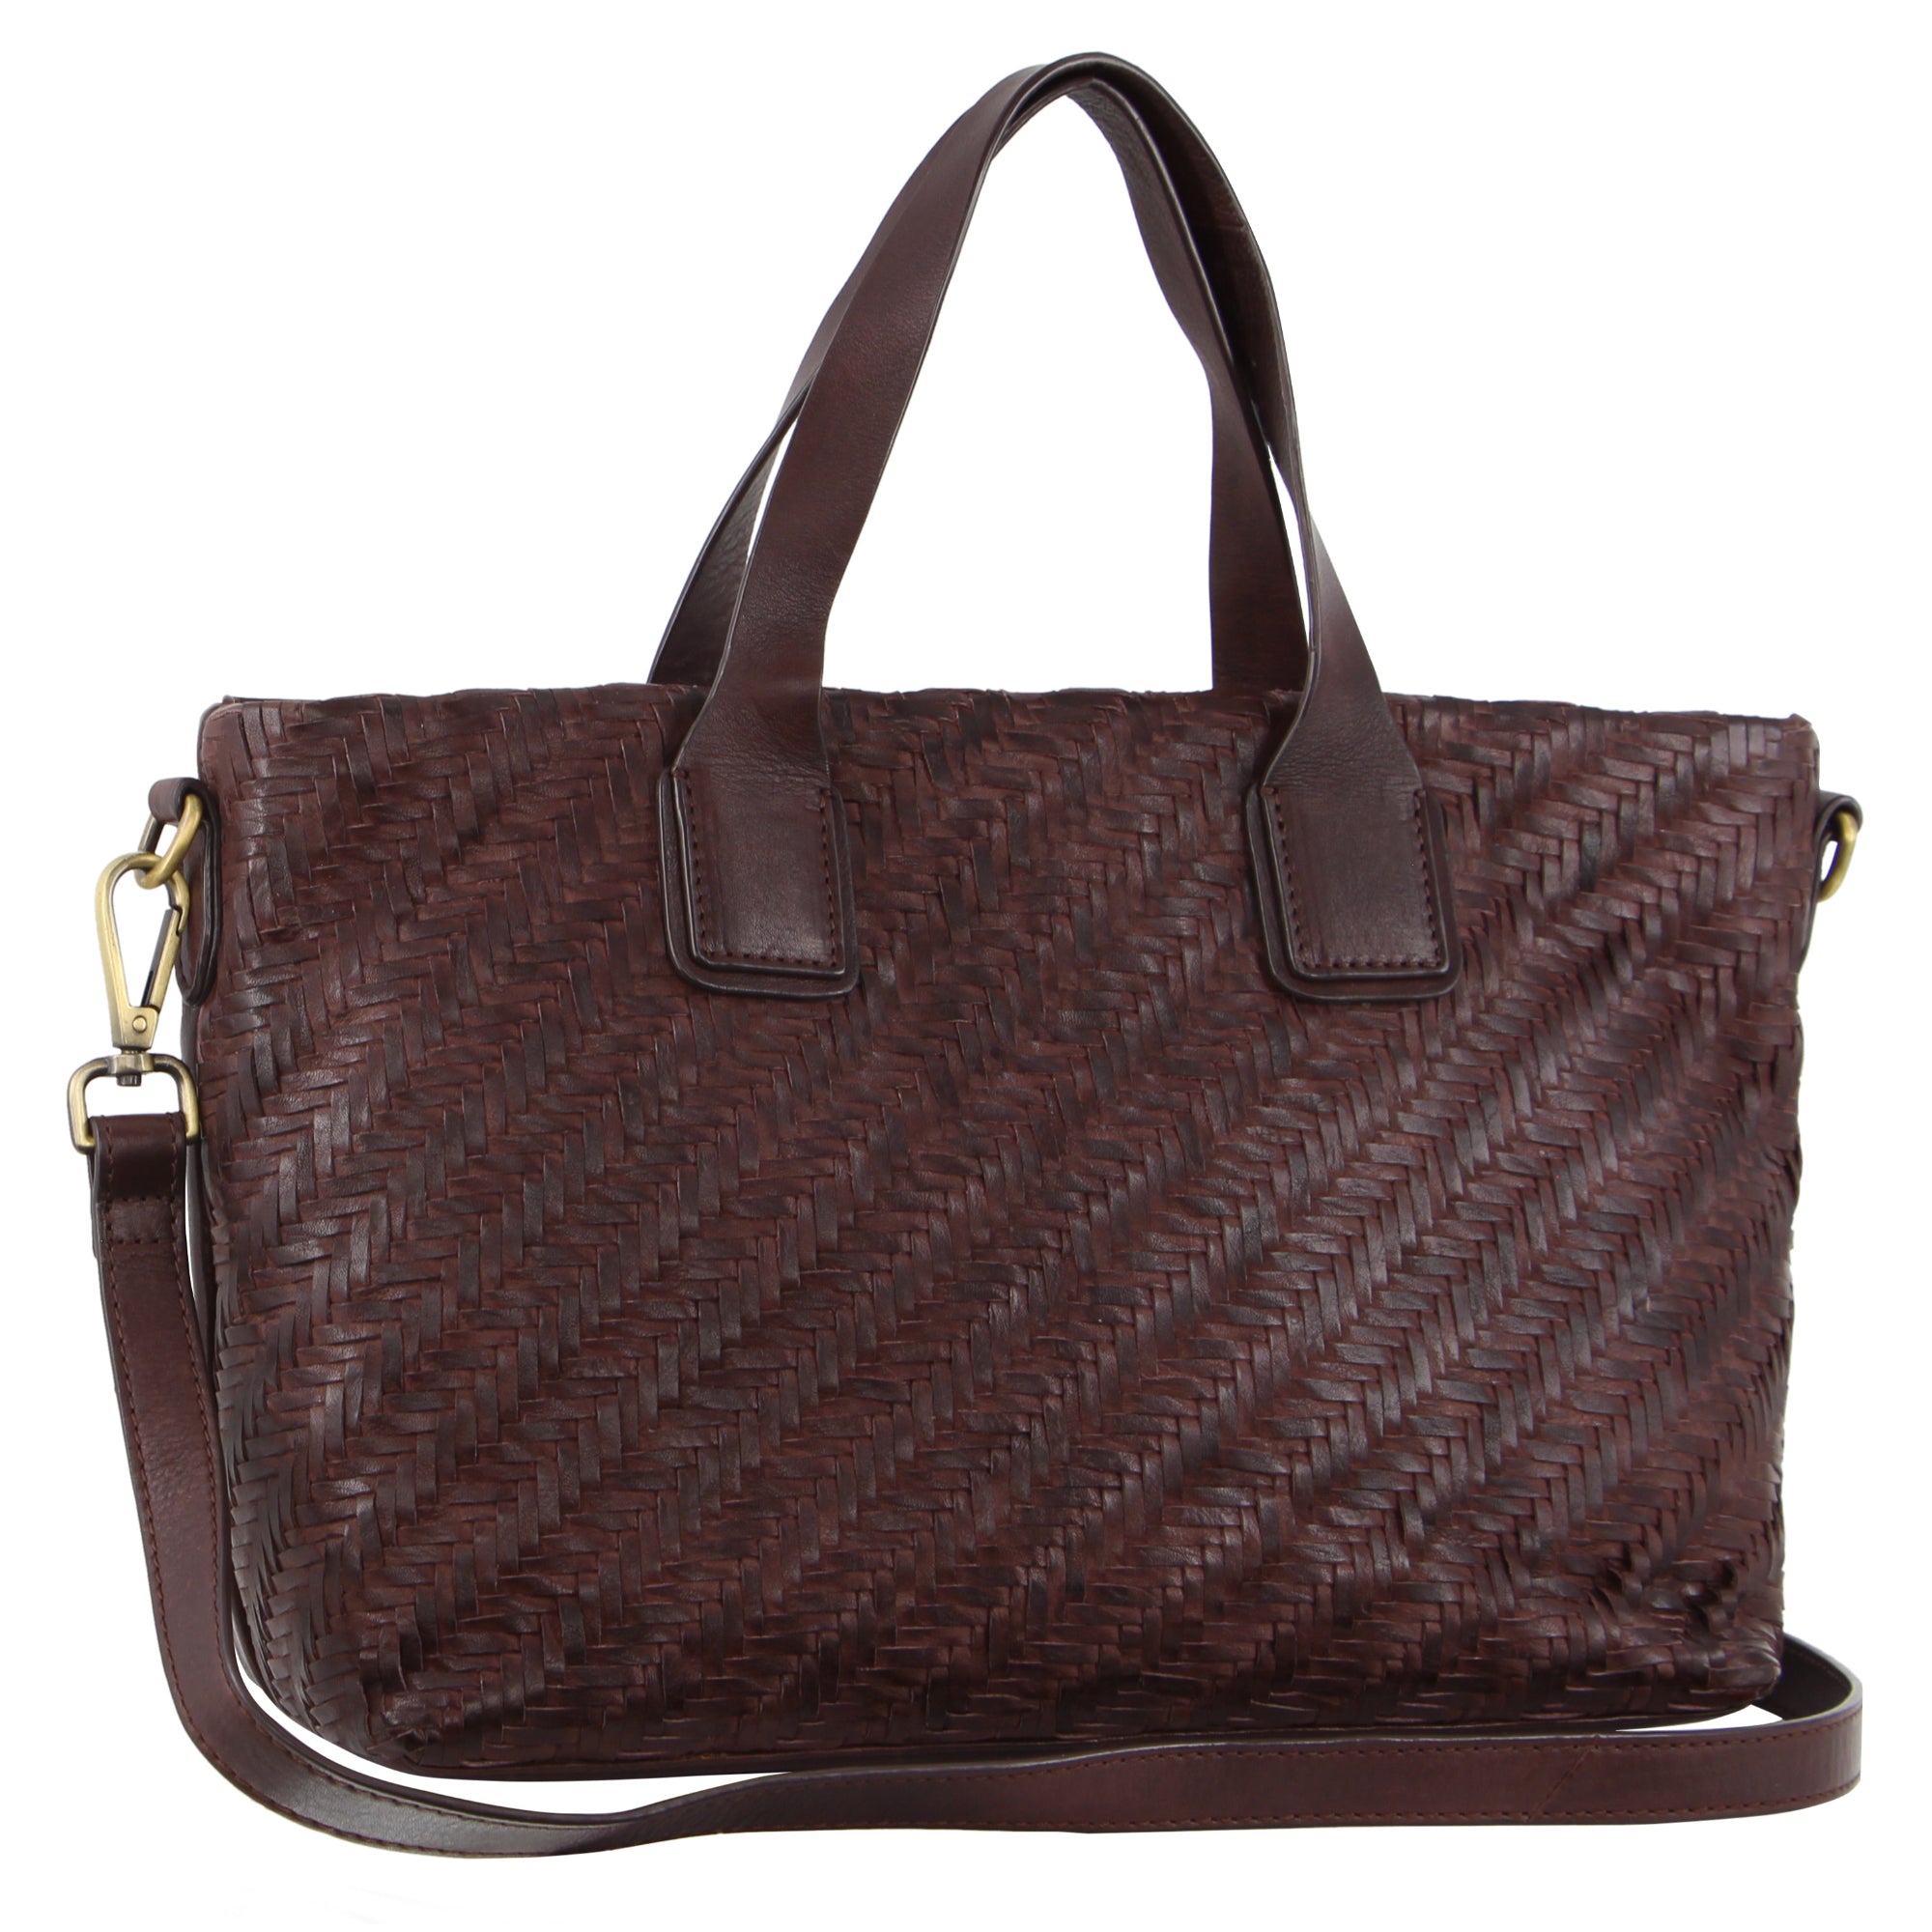 Pierre Cardin Woven Embossed Leather Tote Bag in Burgundy